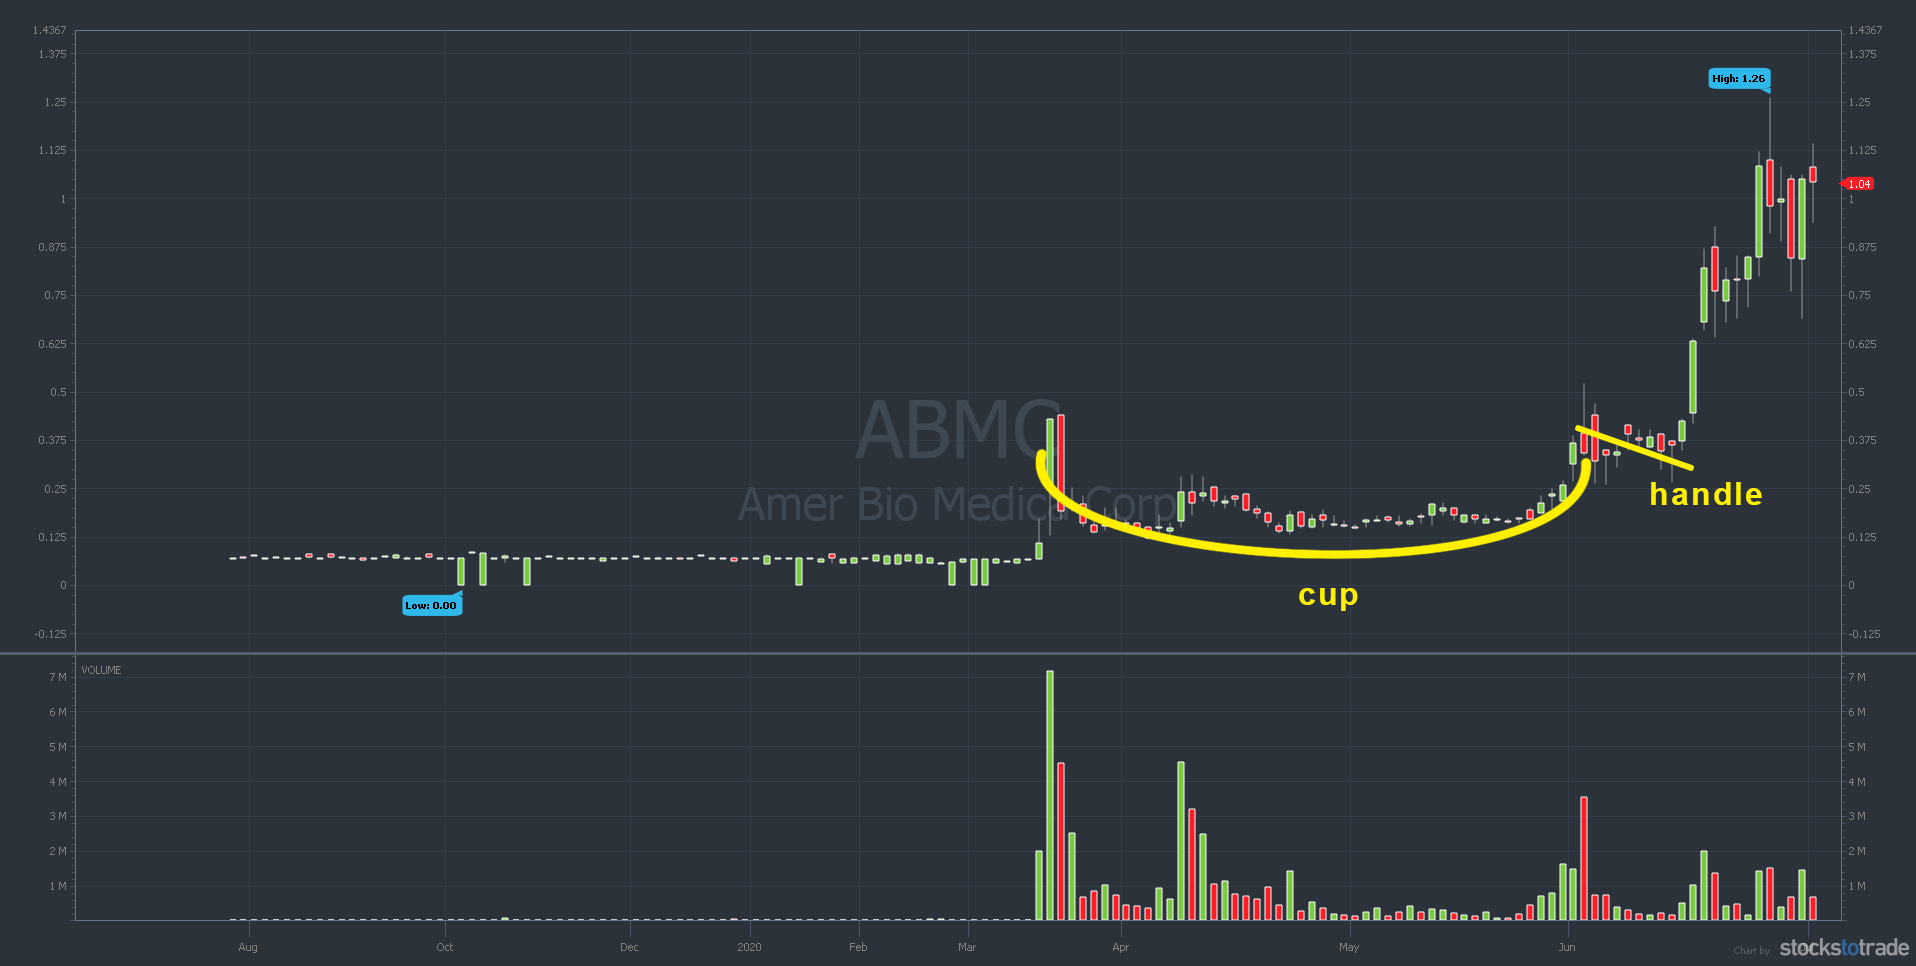 http://stockstotrade.com/wp-content/uploads/2020/09/cup-and-handle-abmc-1-year.png